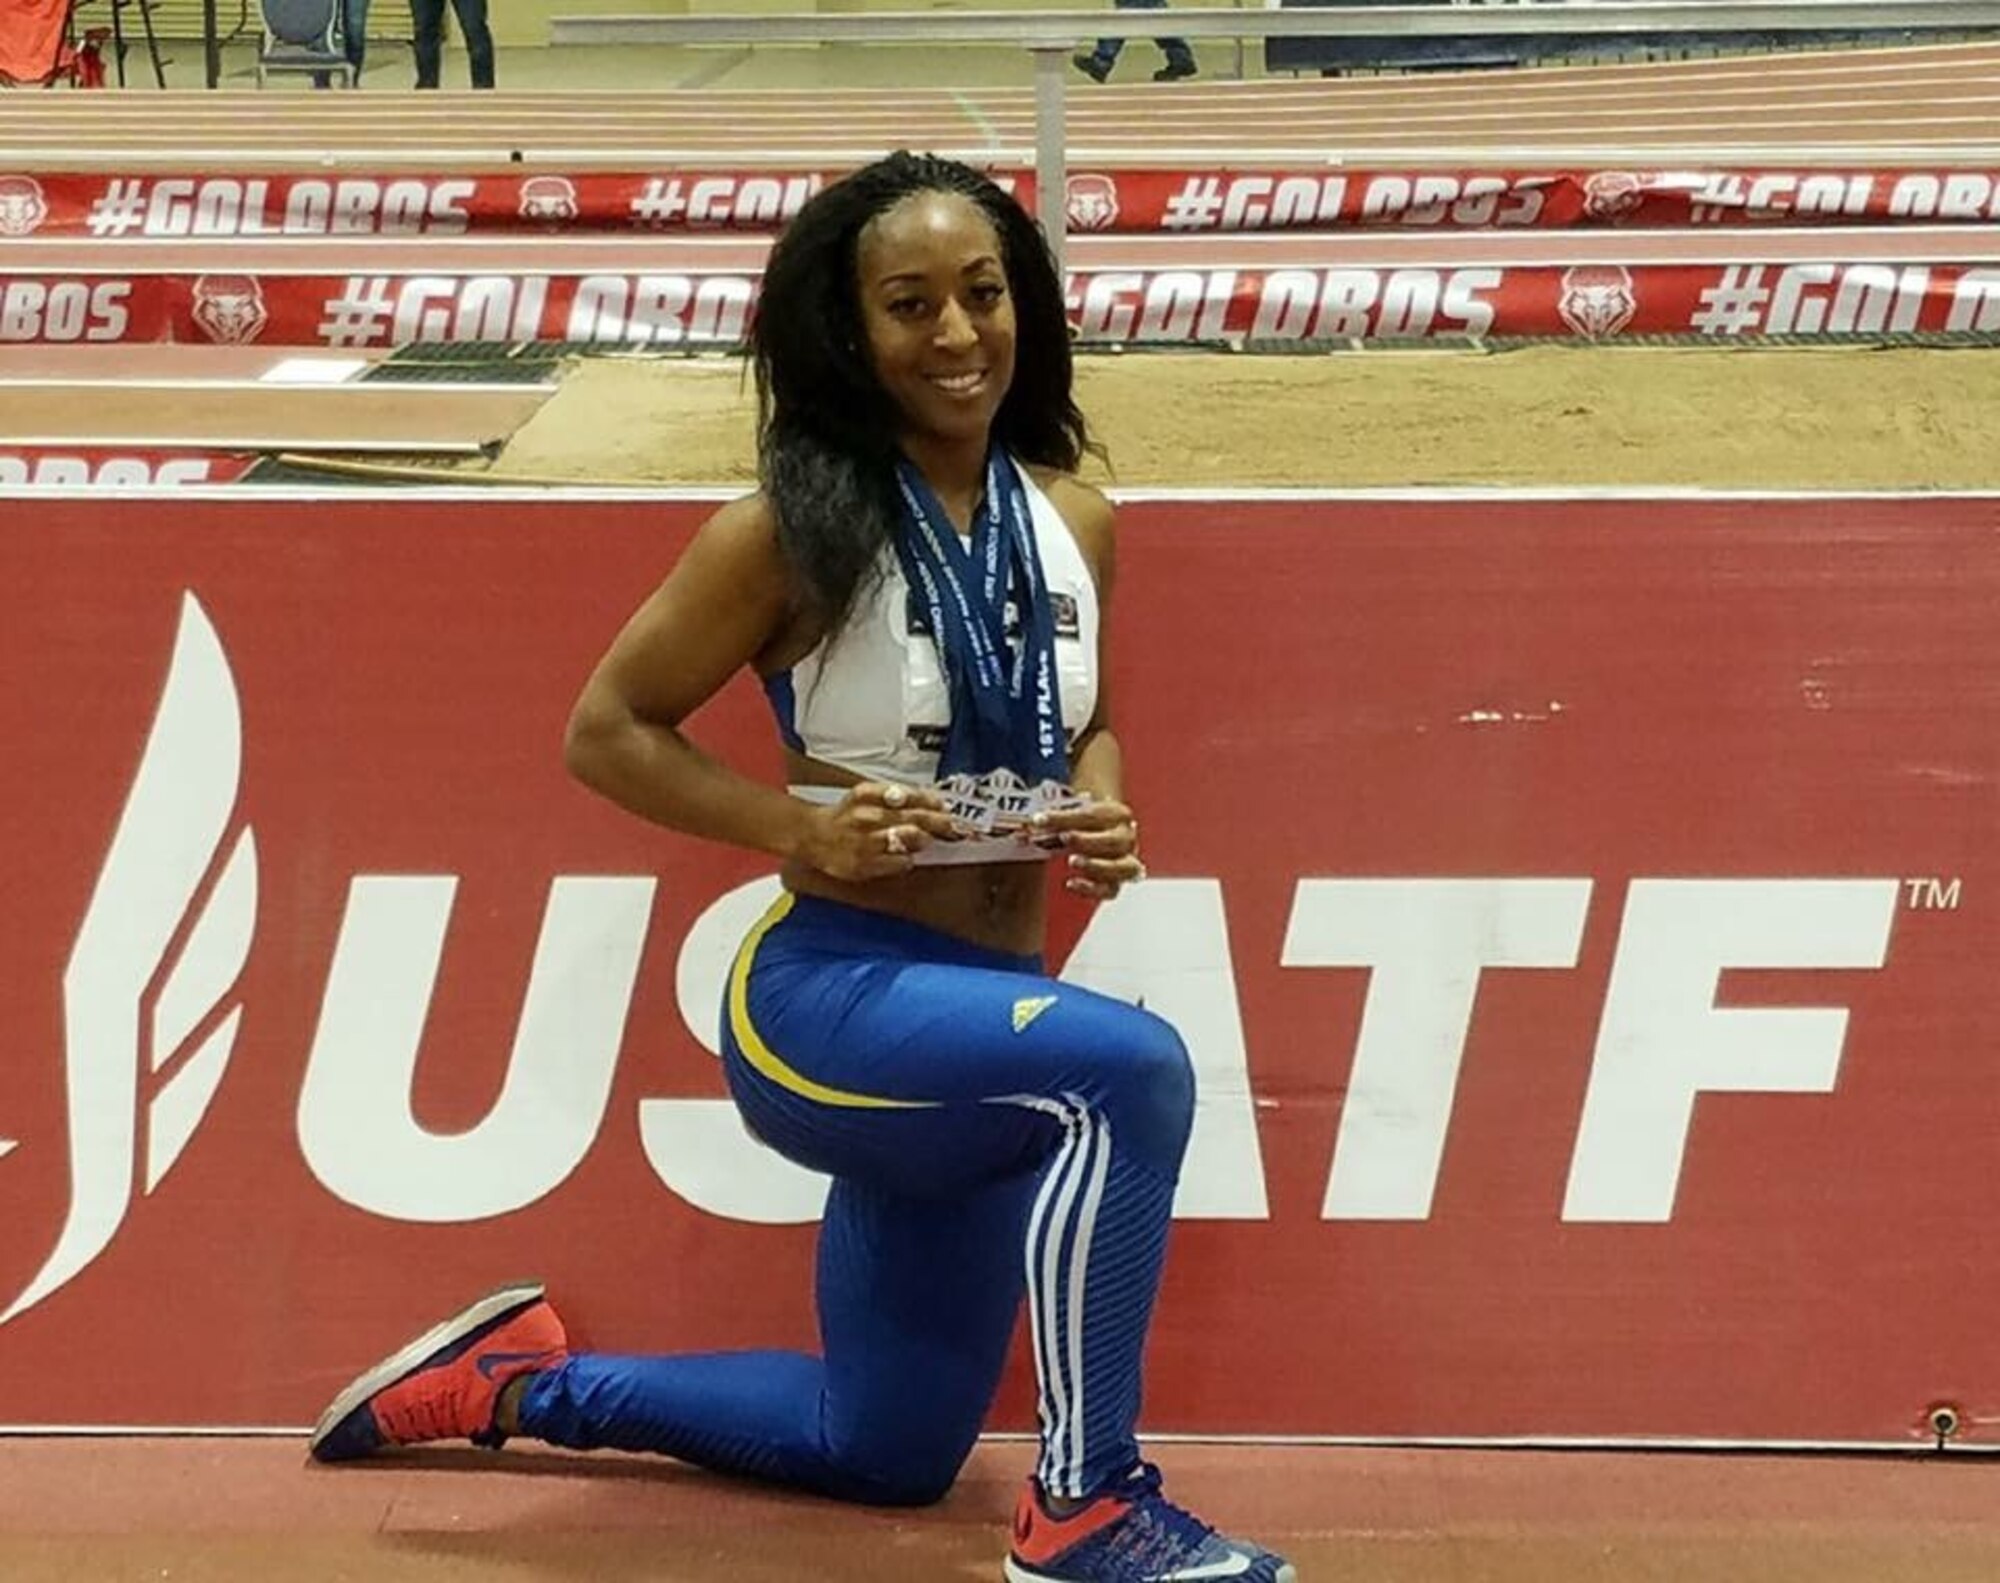 MSgt LaTisha Moulds is schedule to compete in the Air Command Track and Field Championships June 16-23 at Ramstein Air Base, Germany. Although not stationed in Europe, she was selected to participate as a member of the United States Air Forces in Europe track and field team. 